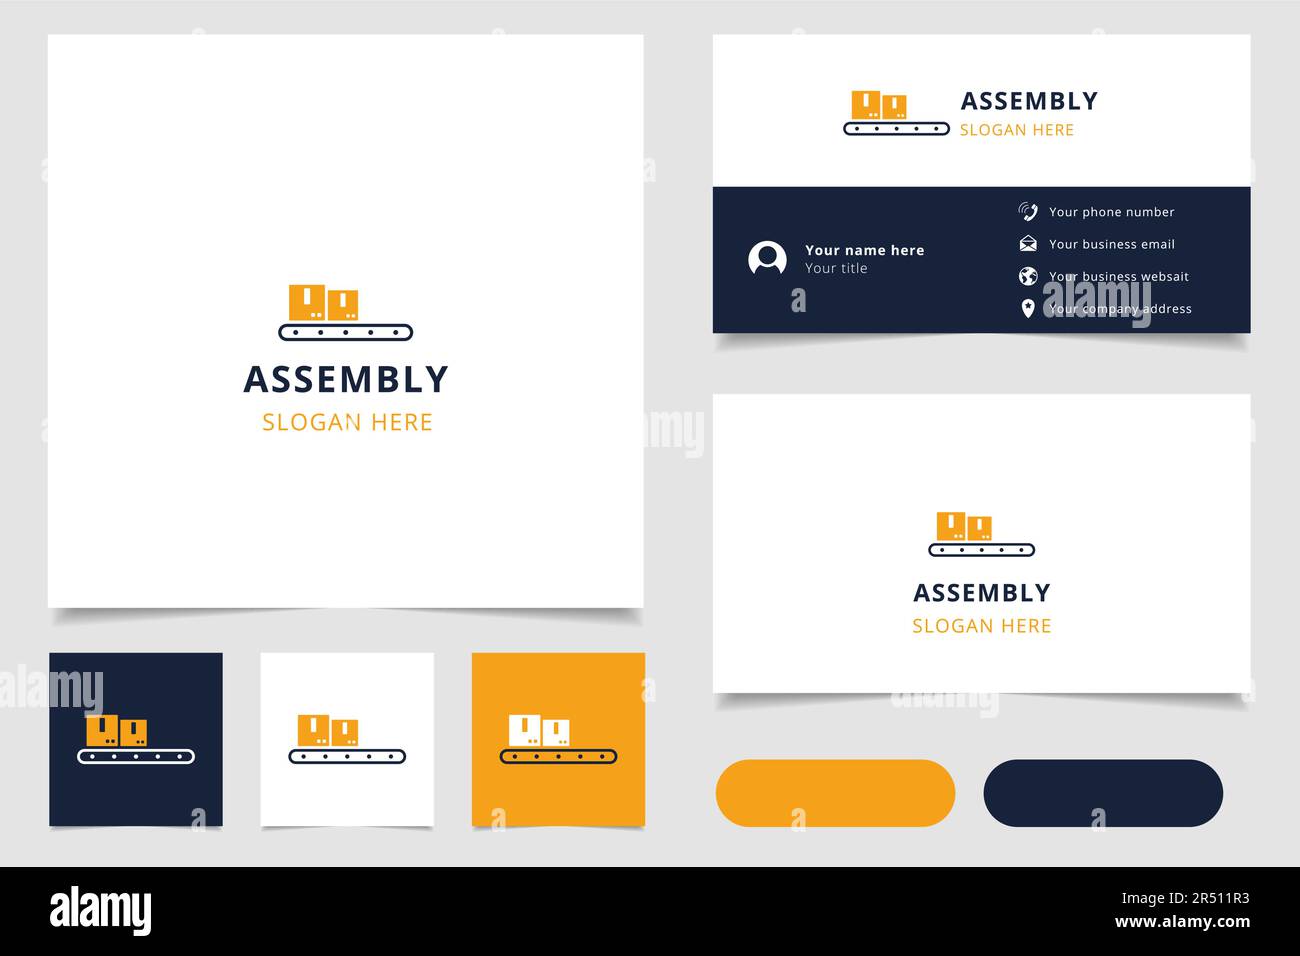 Assembly logo design with editable slogan. Branding book and business ...